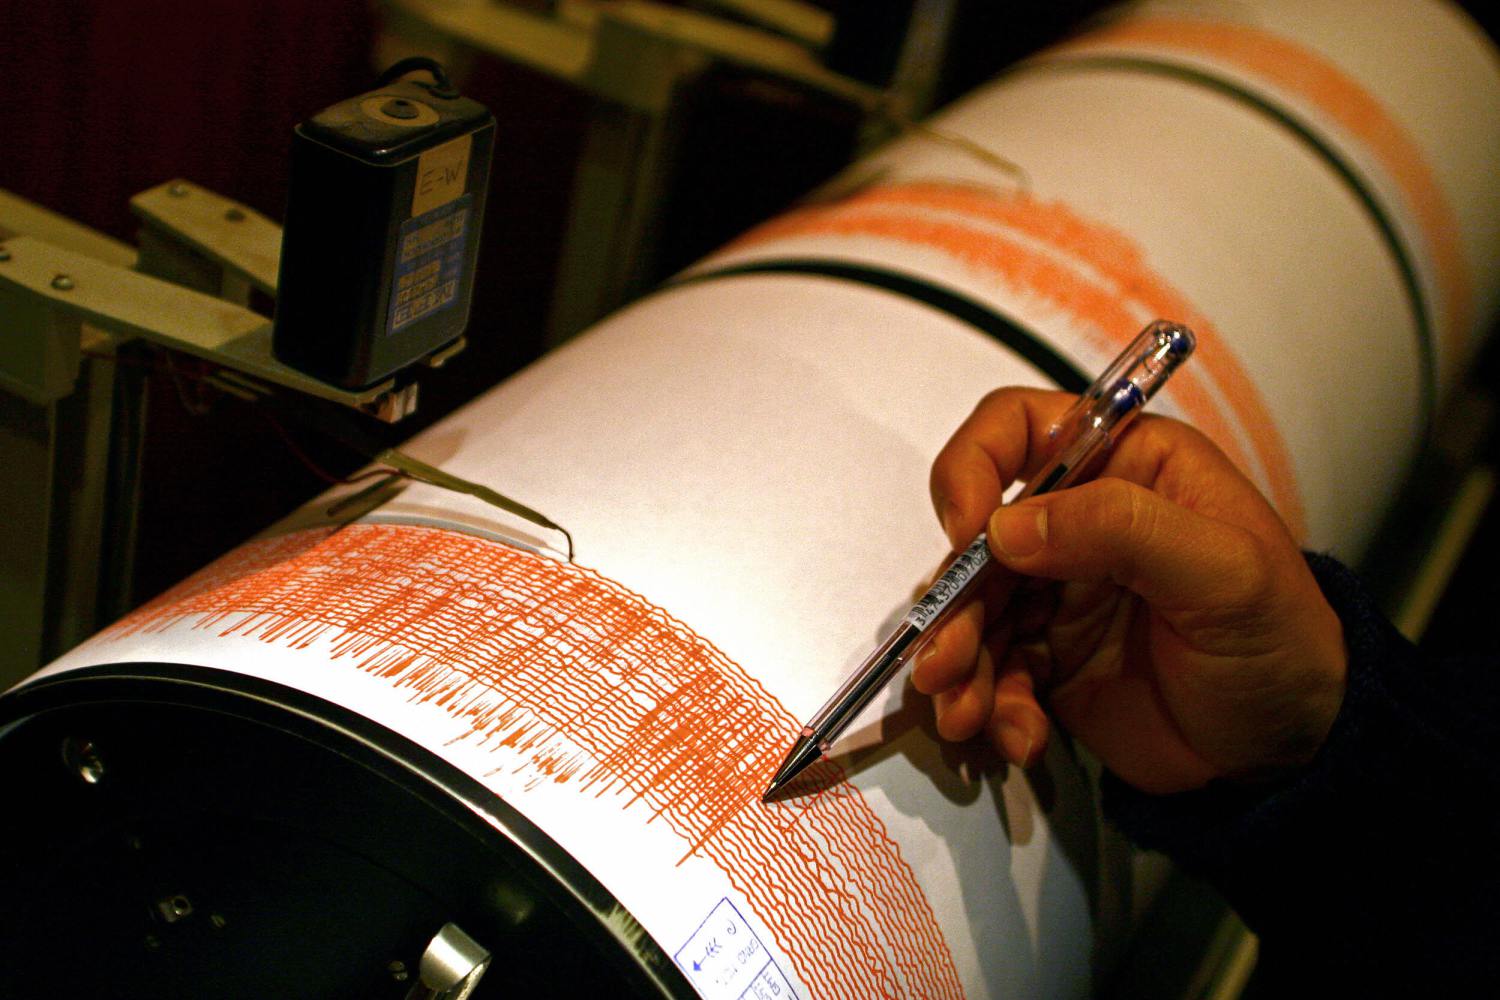 Seismologists: Swarm Of Earthquakes In Nevada Could Be Precursors To A ‘Big One’